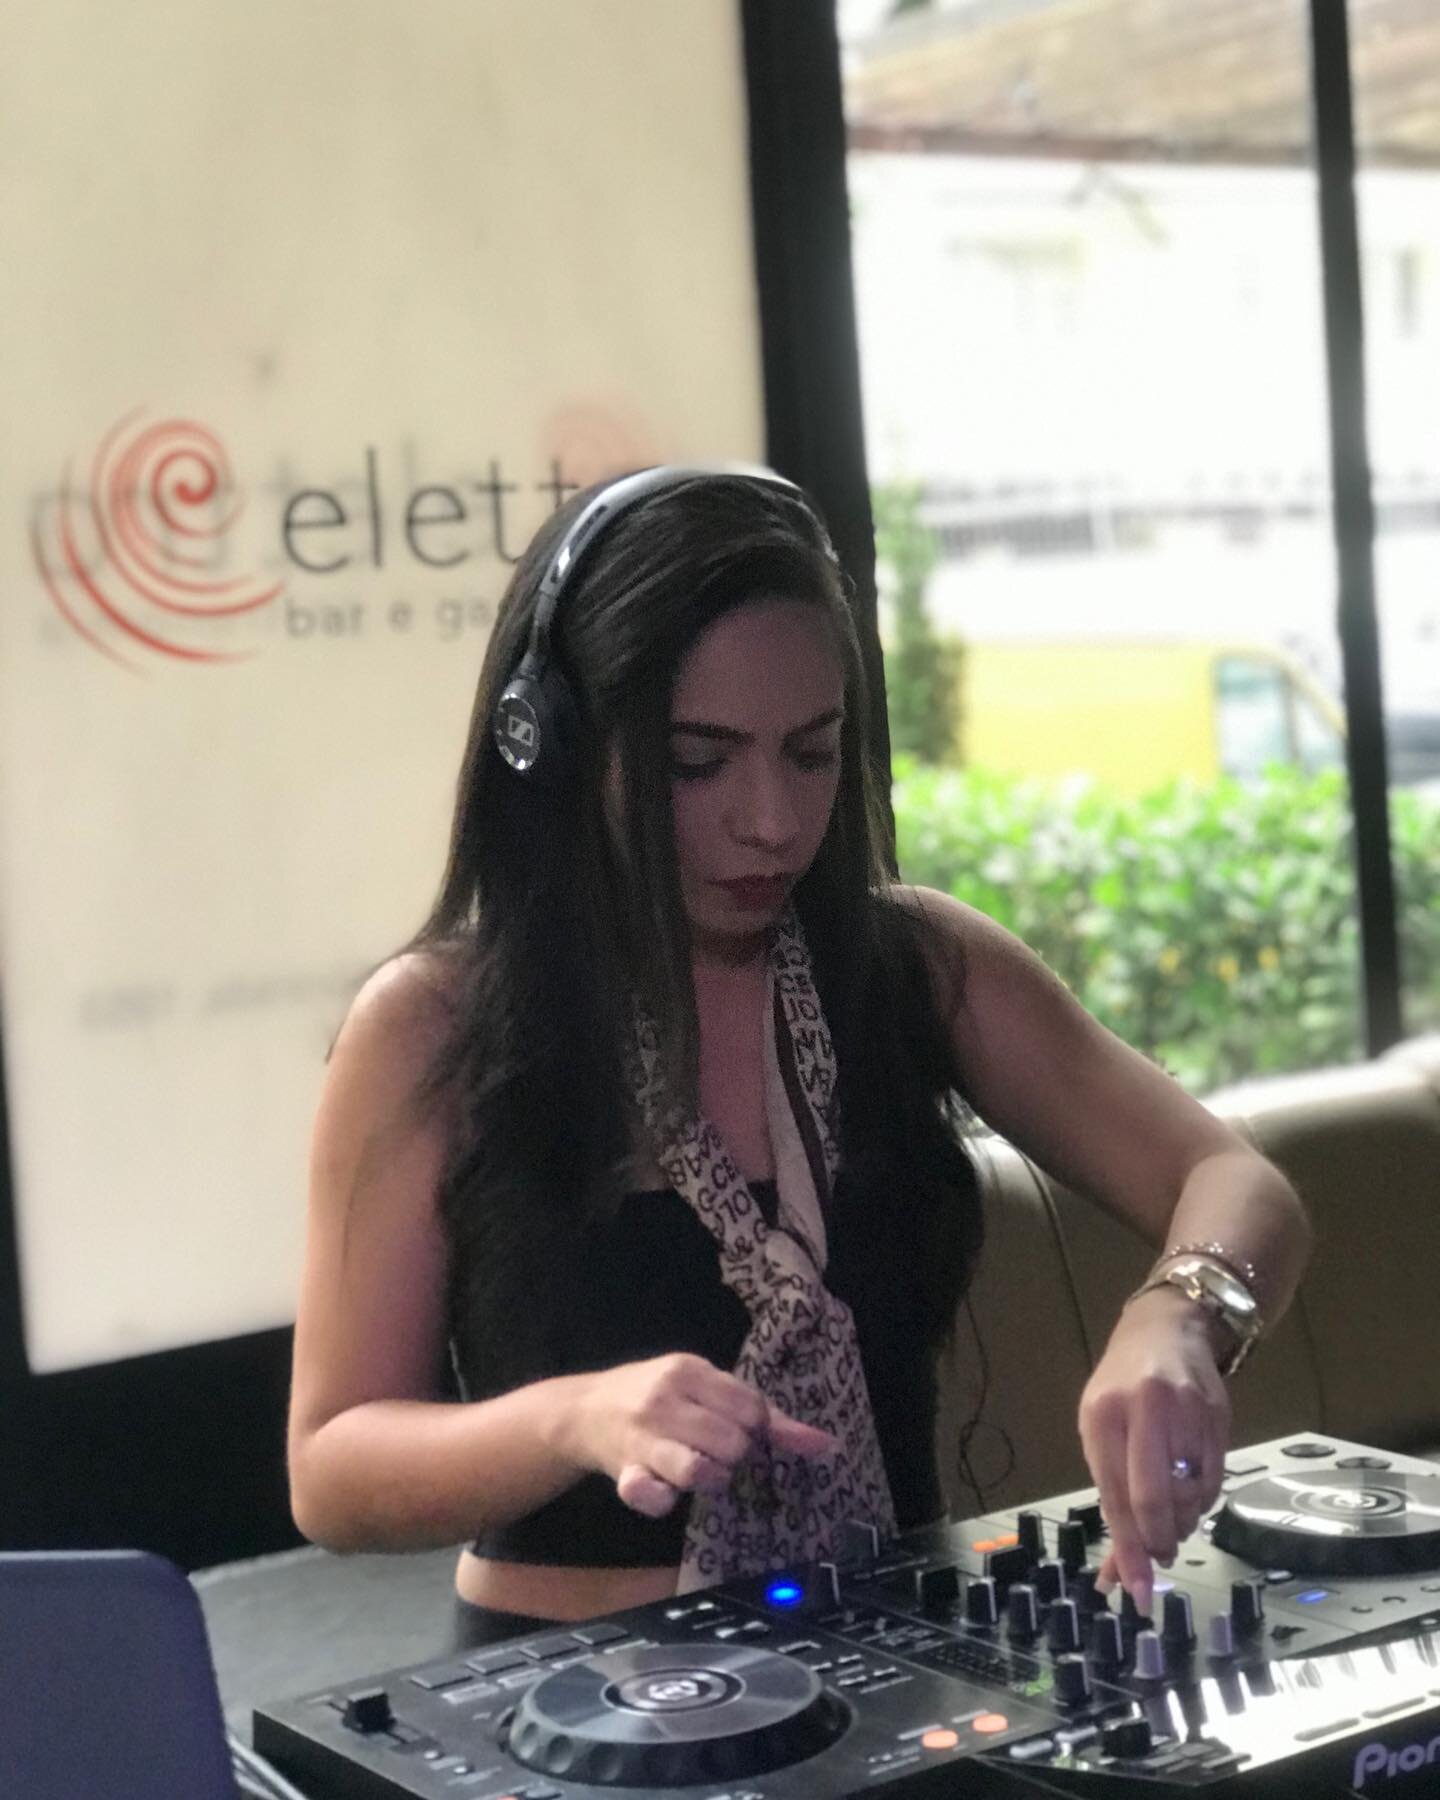 Today at @elettrabar, our golden girl made a warm up for the new sensation of the night in S&atilde;o Paulo. With a refined set inspired by the sets she usually plays in Europe, Carol also played her own songs. Follow her now on Spotify - Access Code